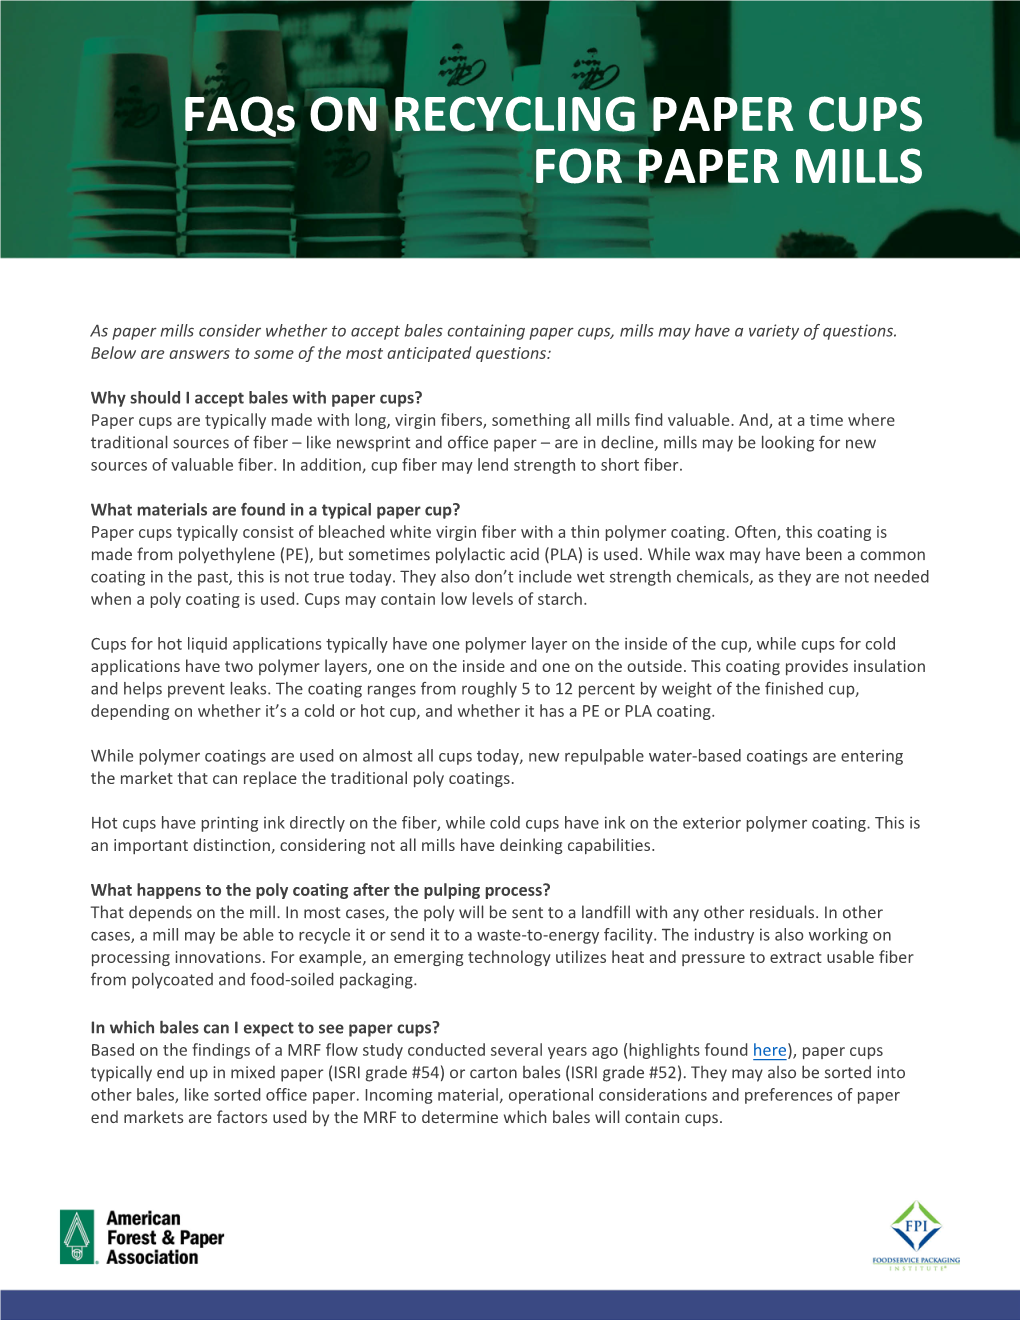 Faqs on RECYCLING PAPER CUPS for PAPER MILLS